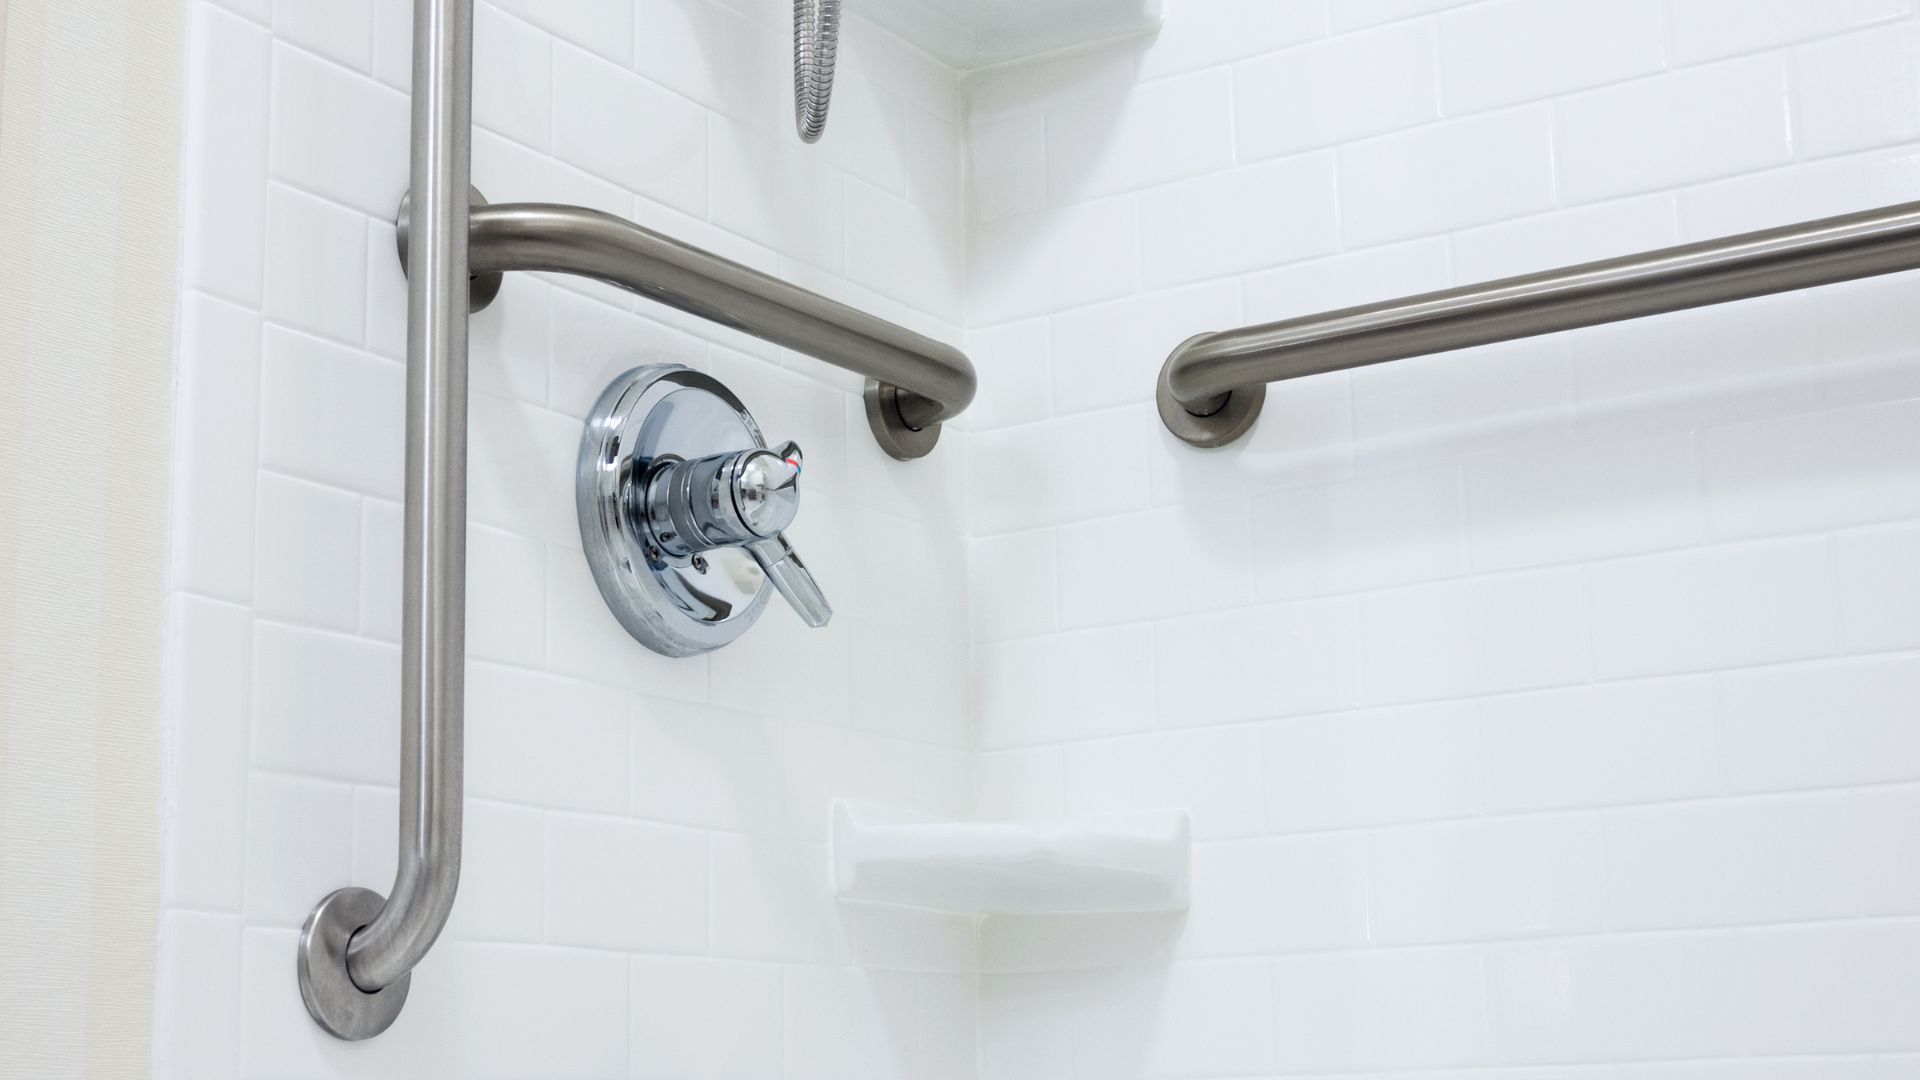 Guaranteeing Accessibility and Security for Plumbers